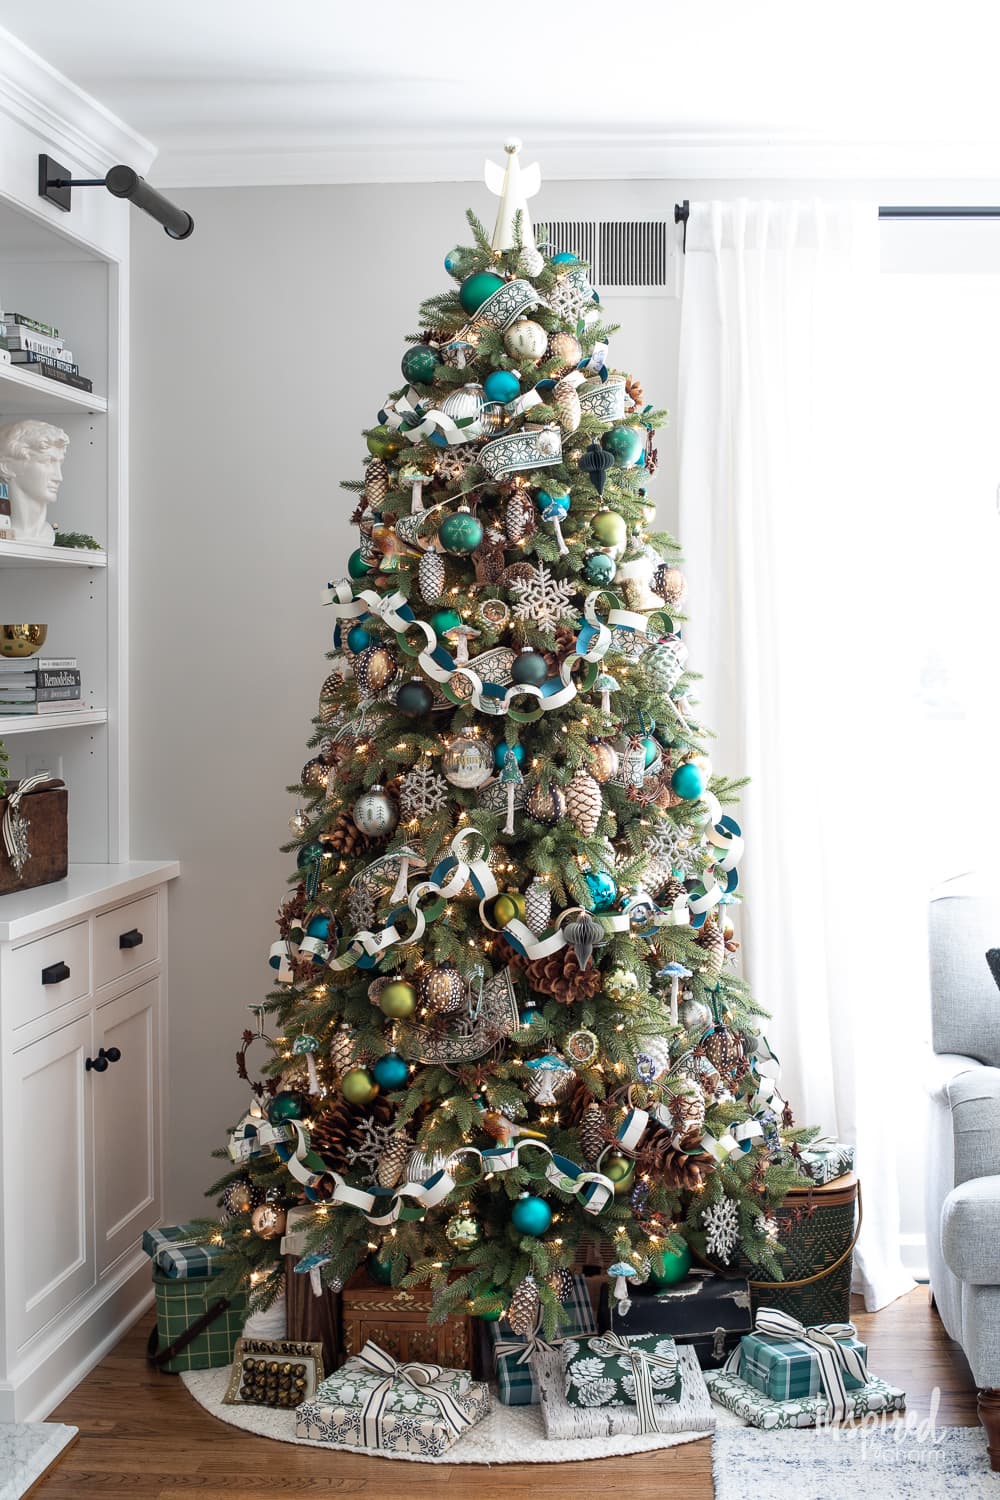 Nature-Inspired Christmas Tree with Handmade Decorations